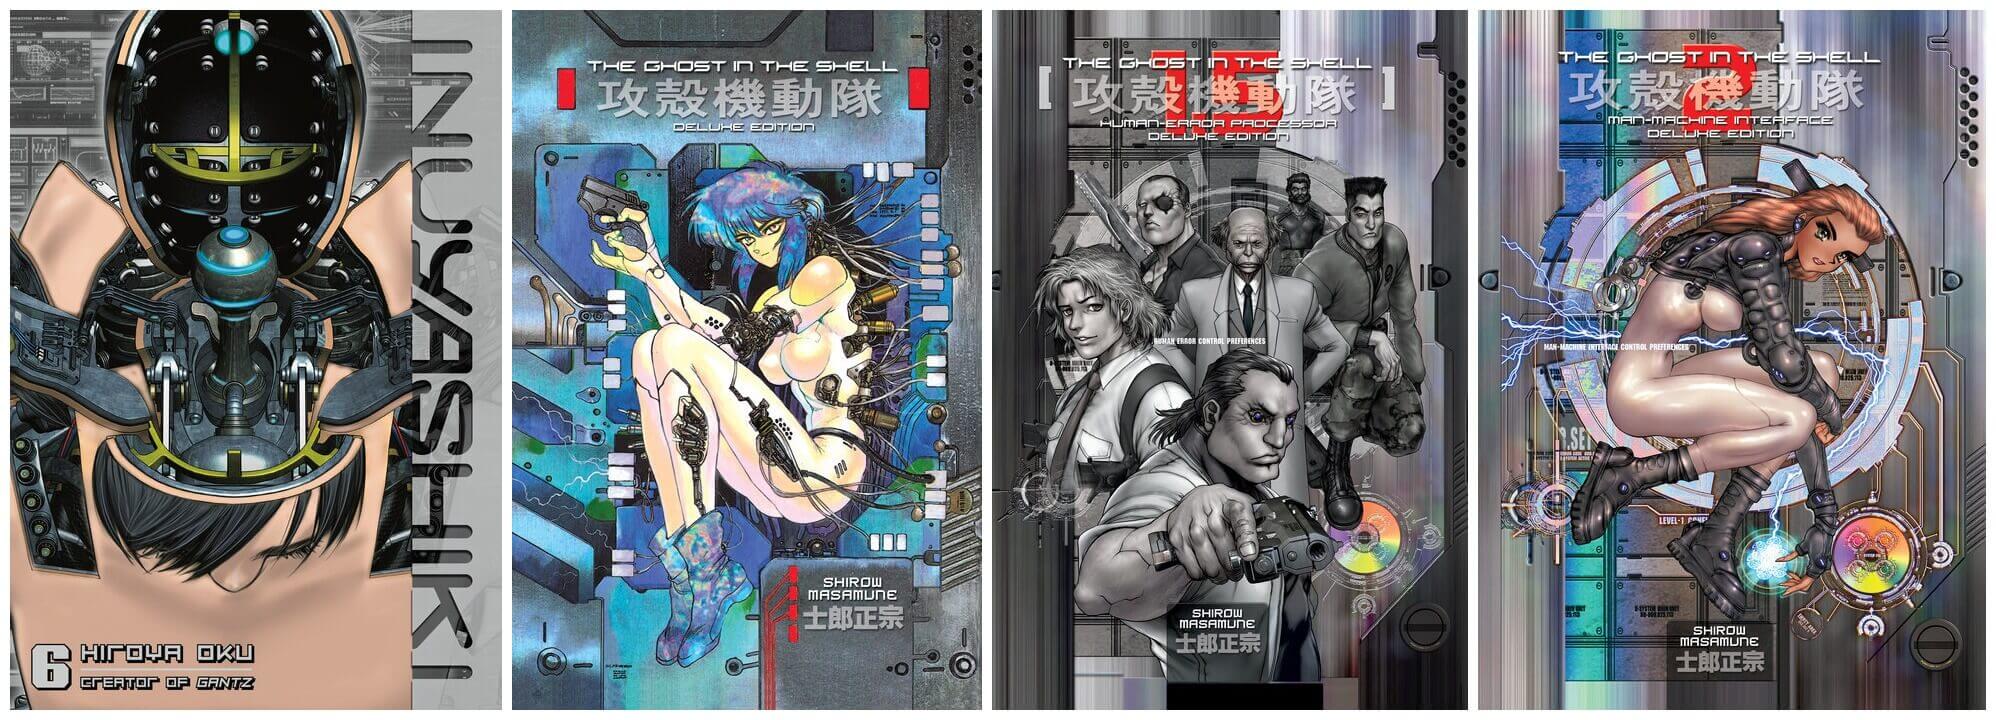 February 2017 Manga Releases Covers of Inuyashiki and Ghost in the Shell.